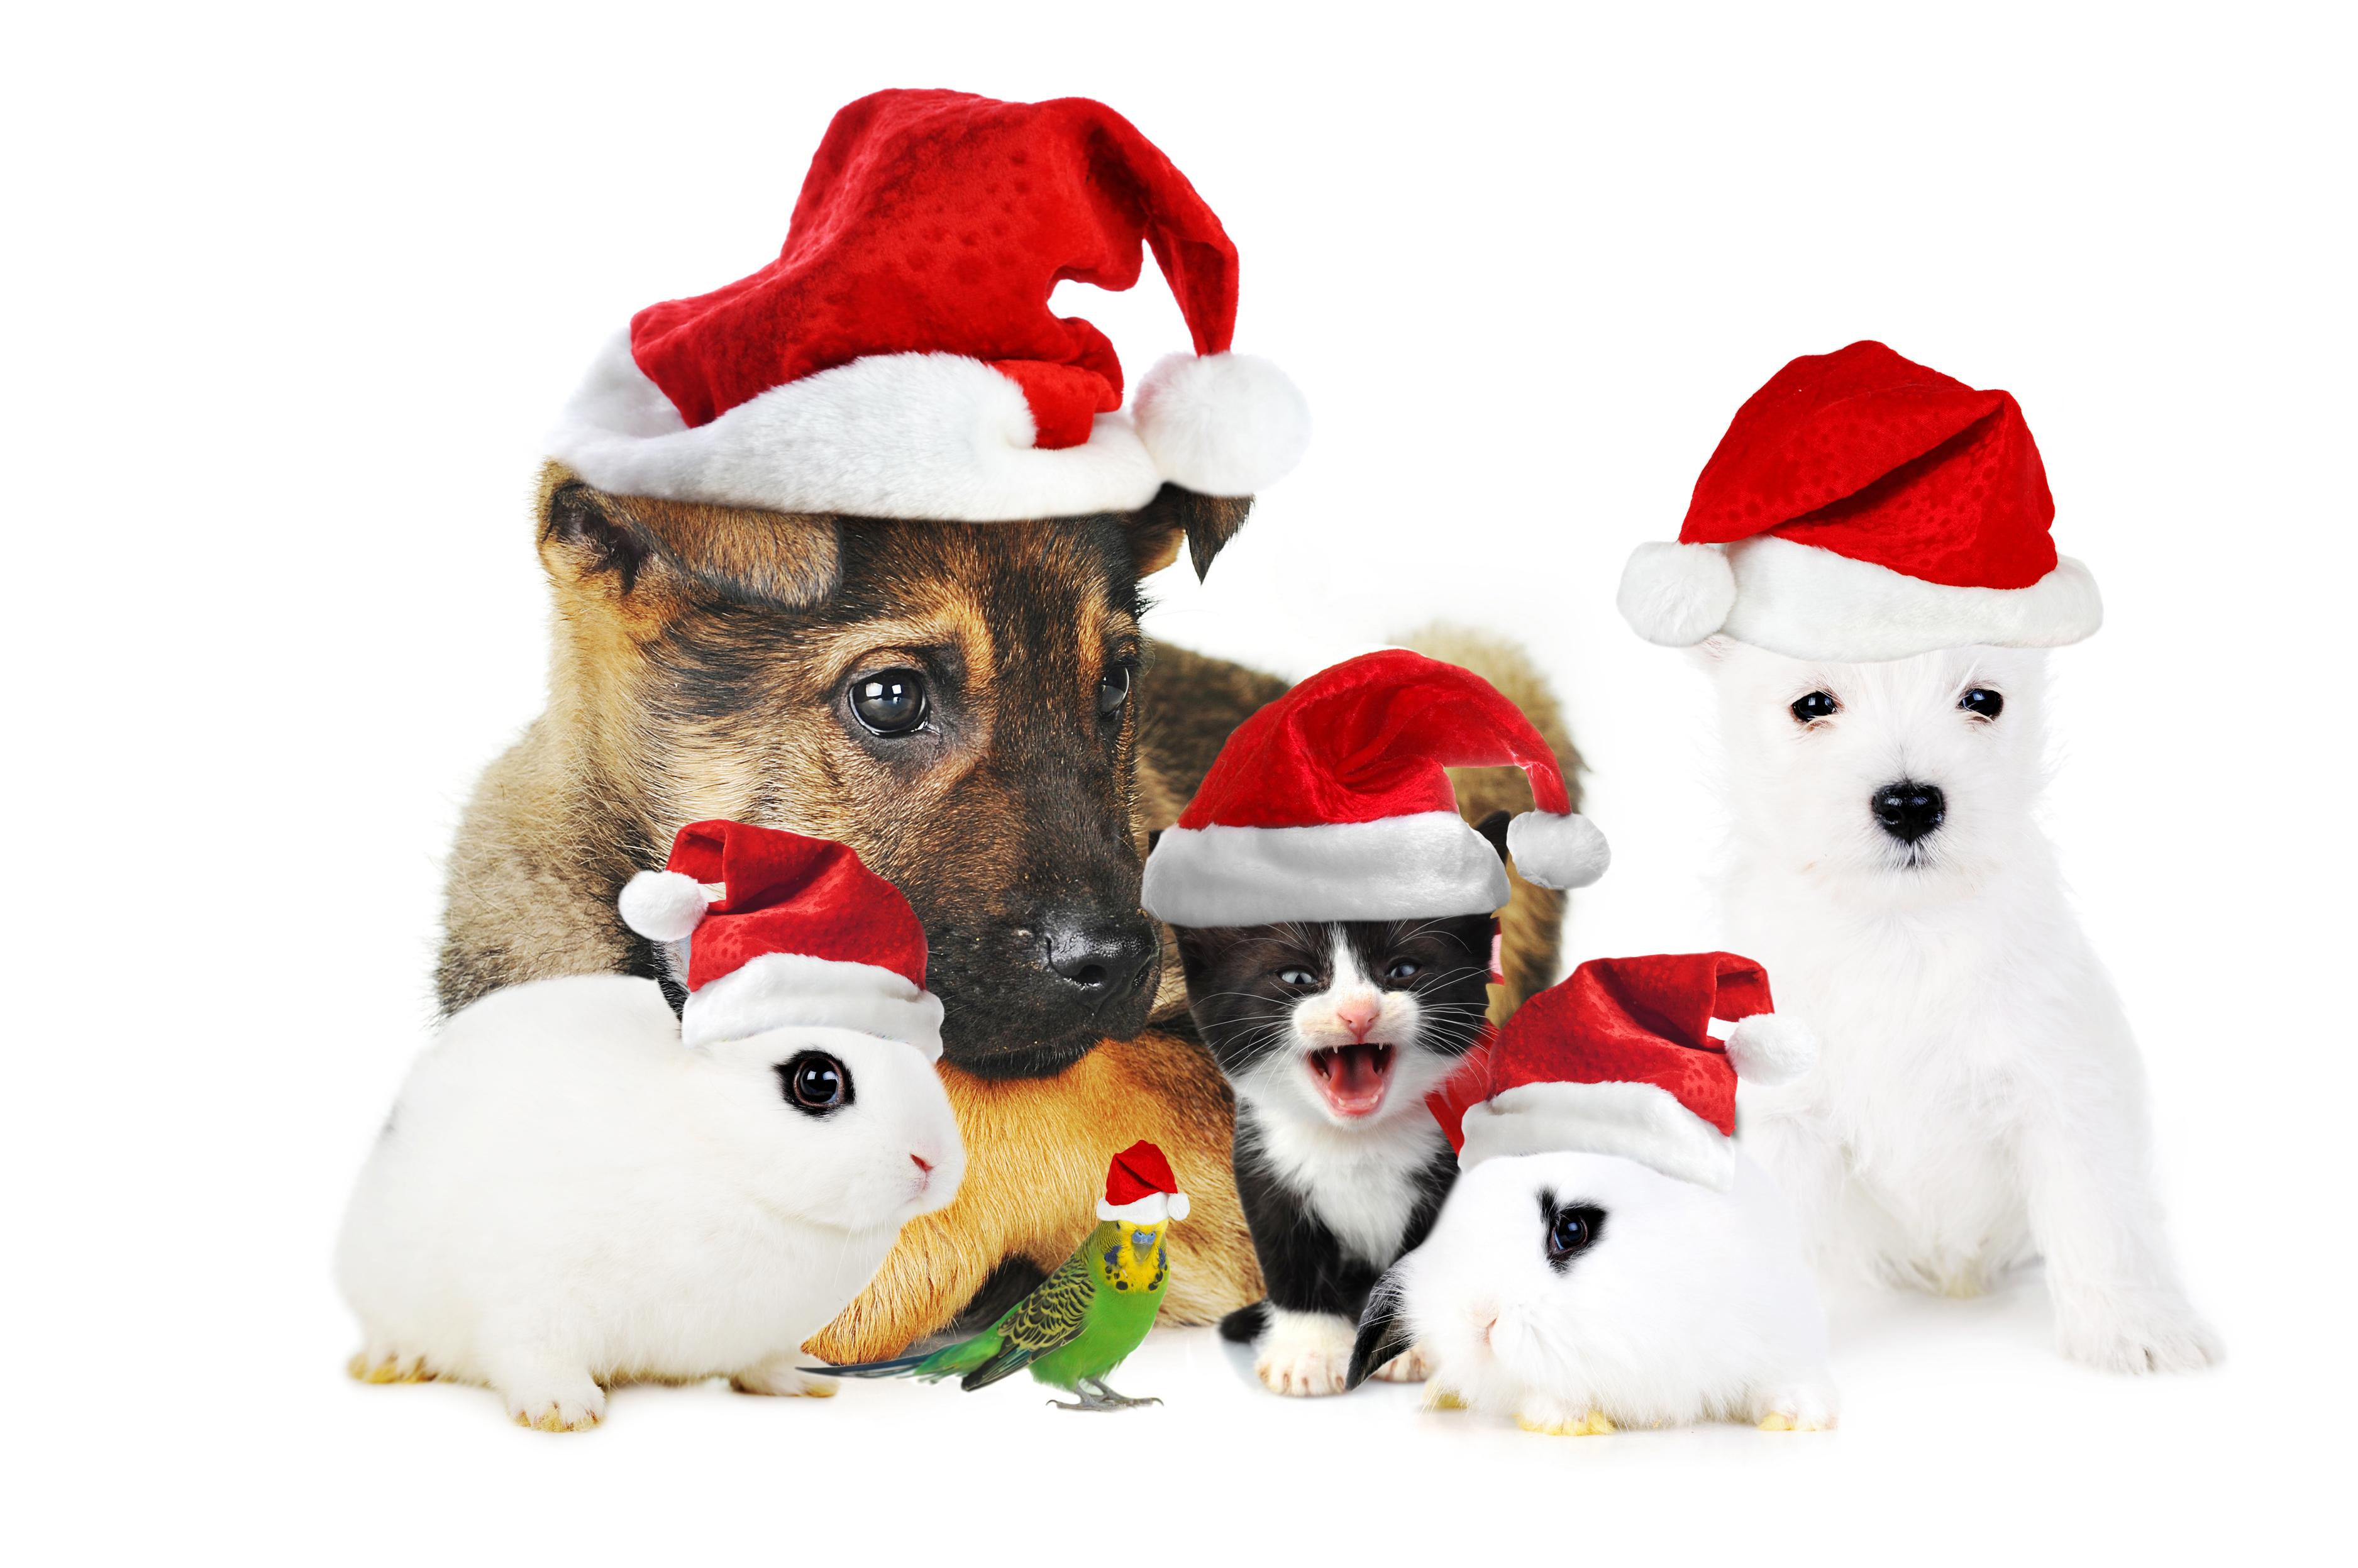 Image Puppies Kitty Cat Dogs Cats Rabbit Parrots New Year